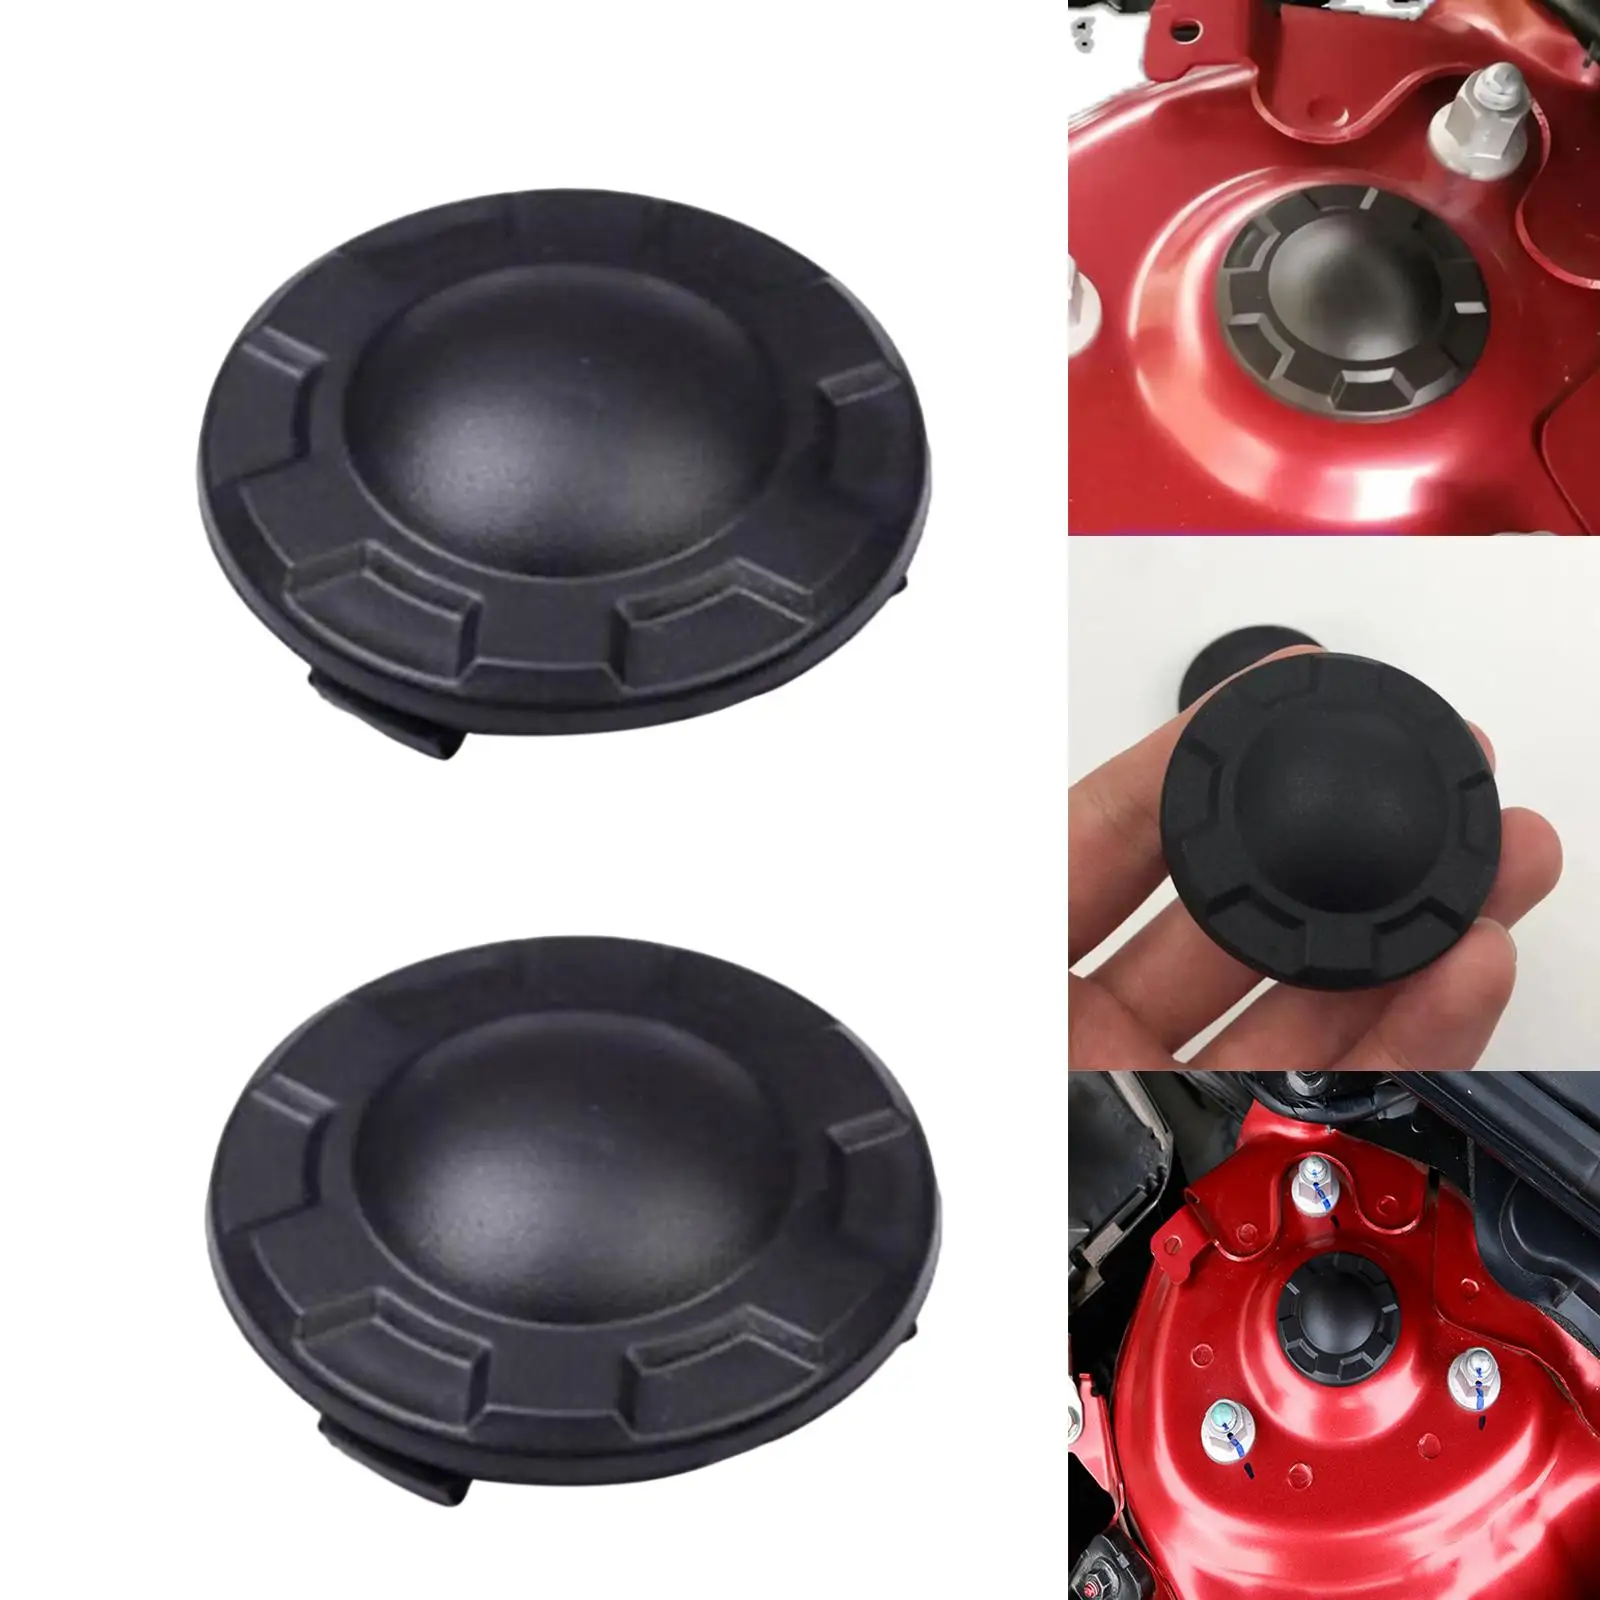 Front Top Suspension Strut Mount Cover Cap, Shock Absorber Protection Cover Cap for5 CX 8